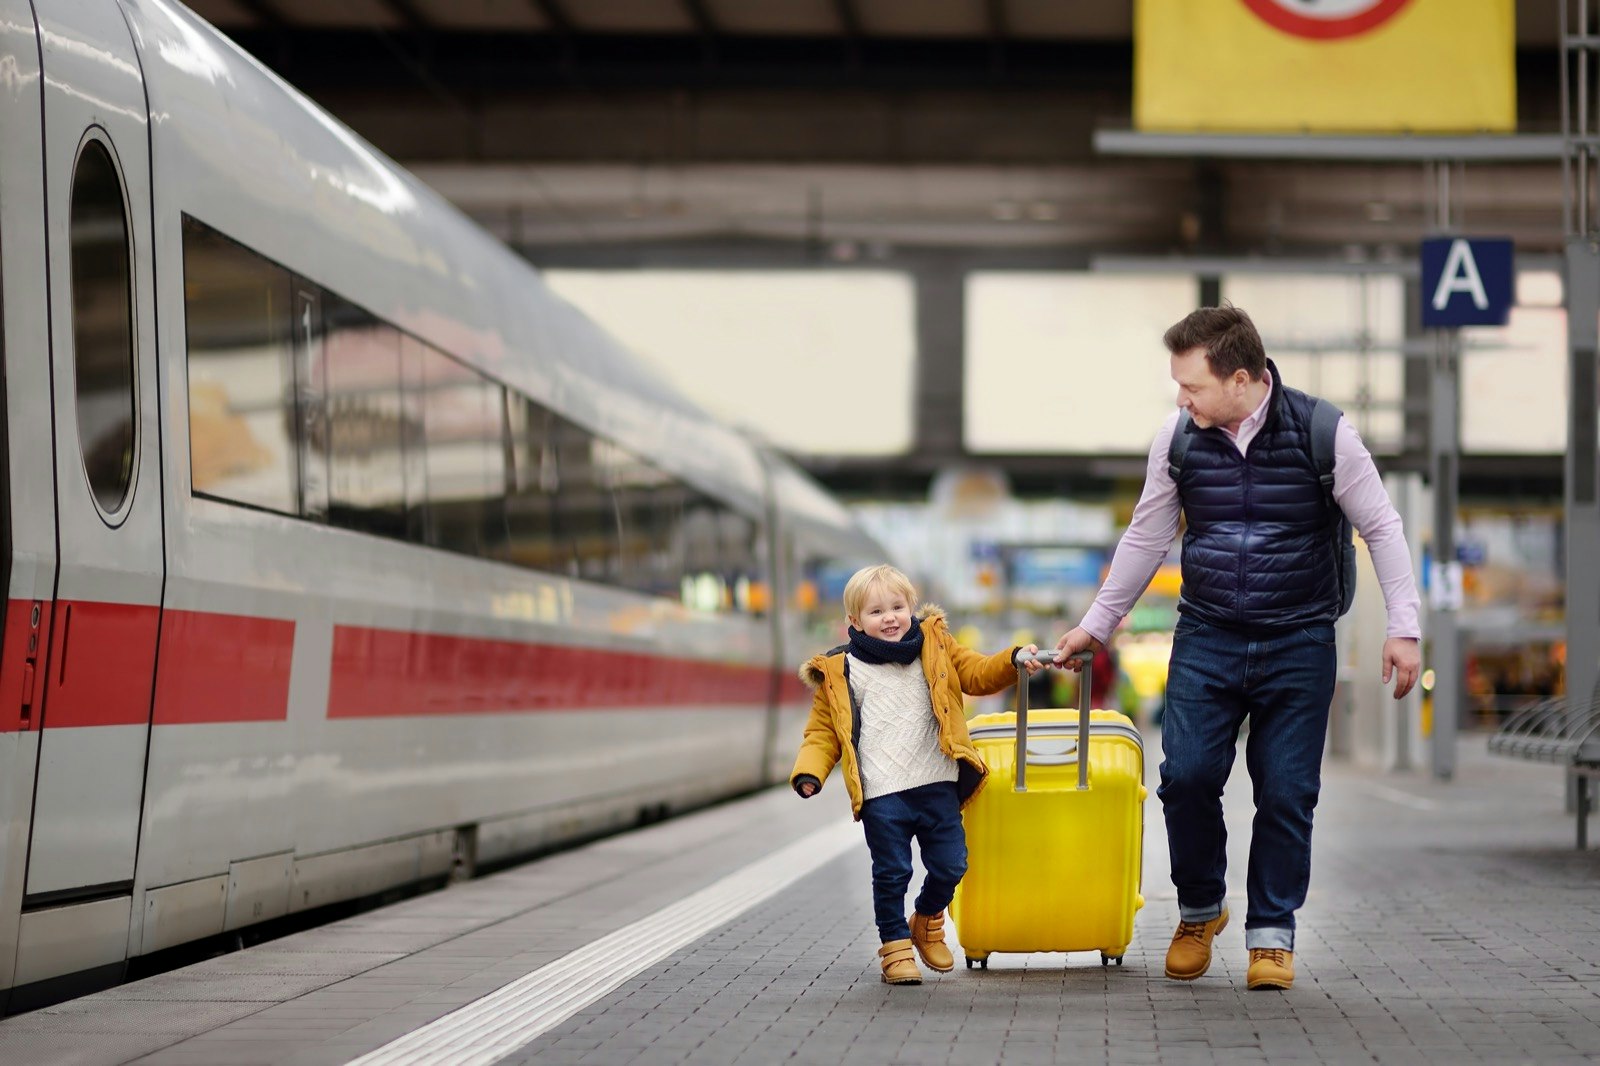 father and son pull a big yellow suitcase on a train platform